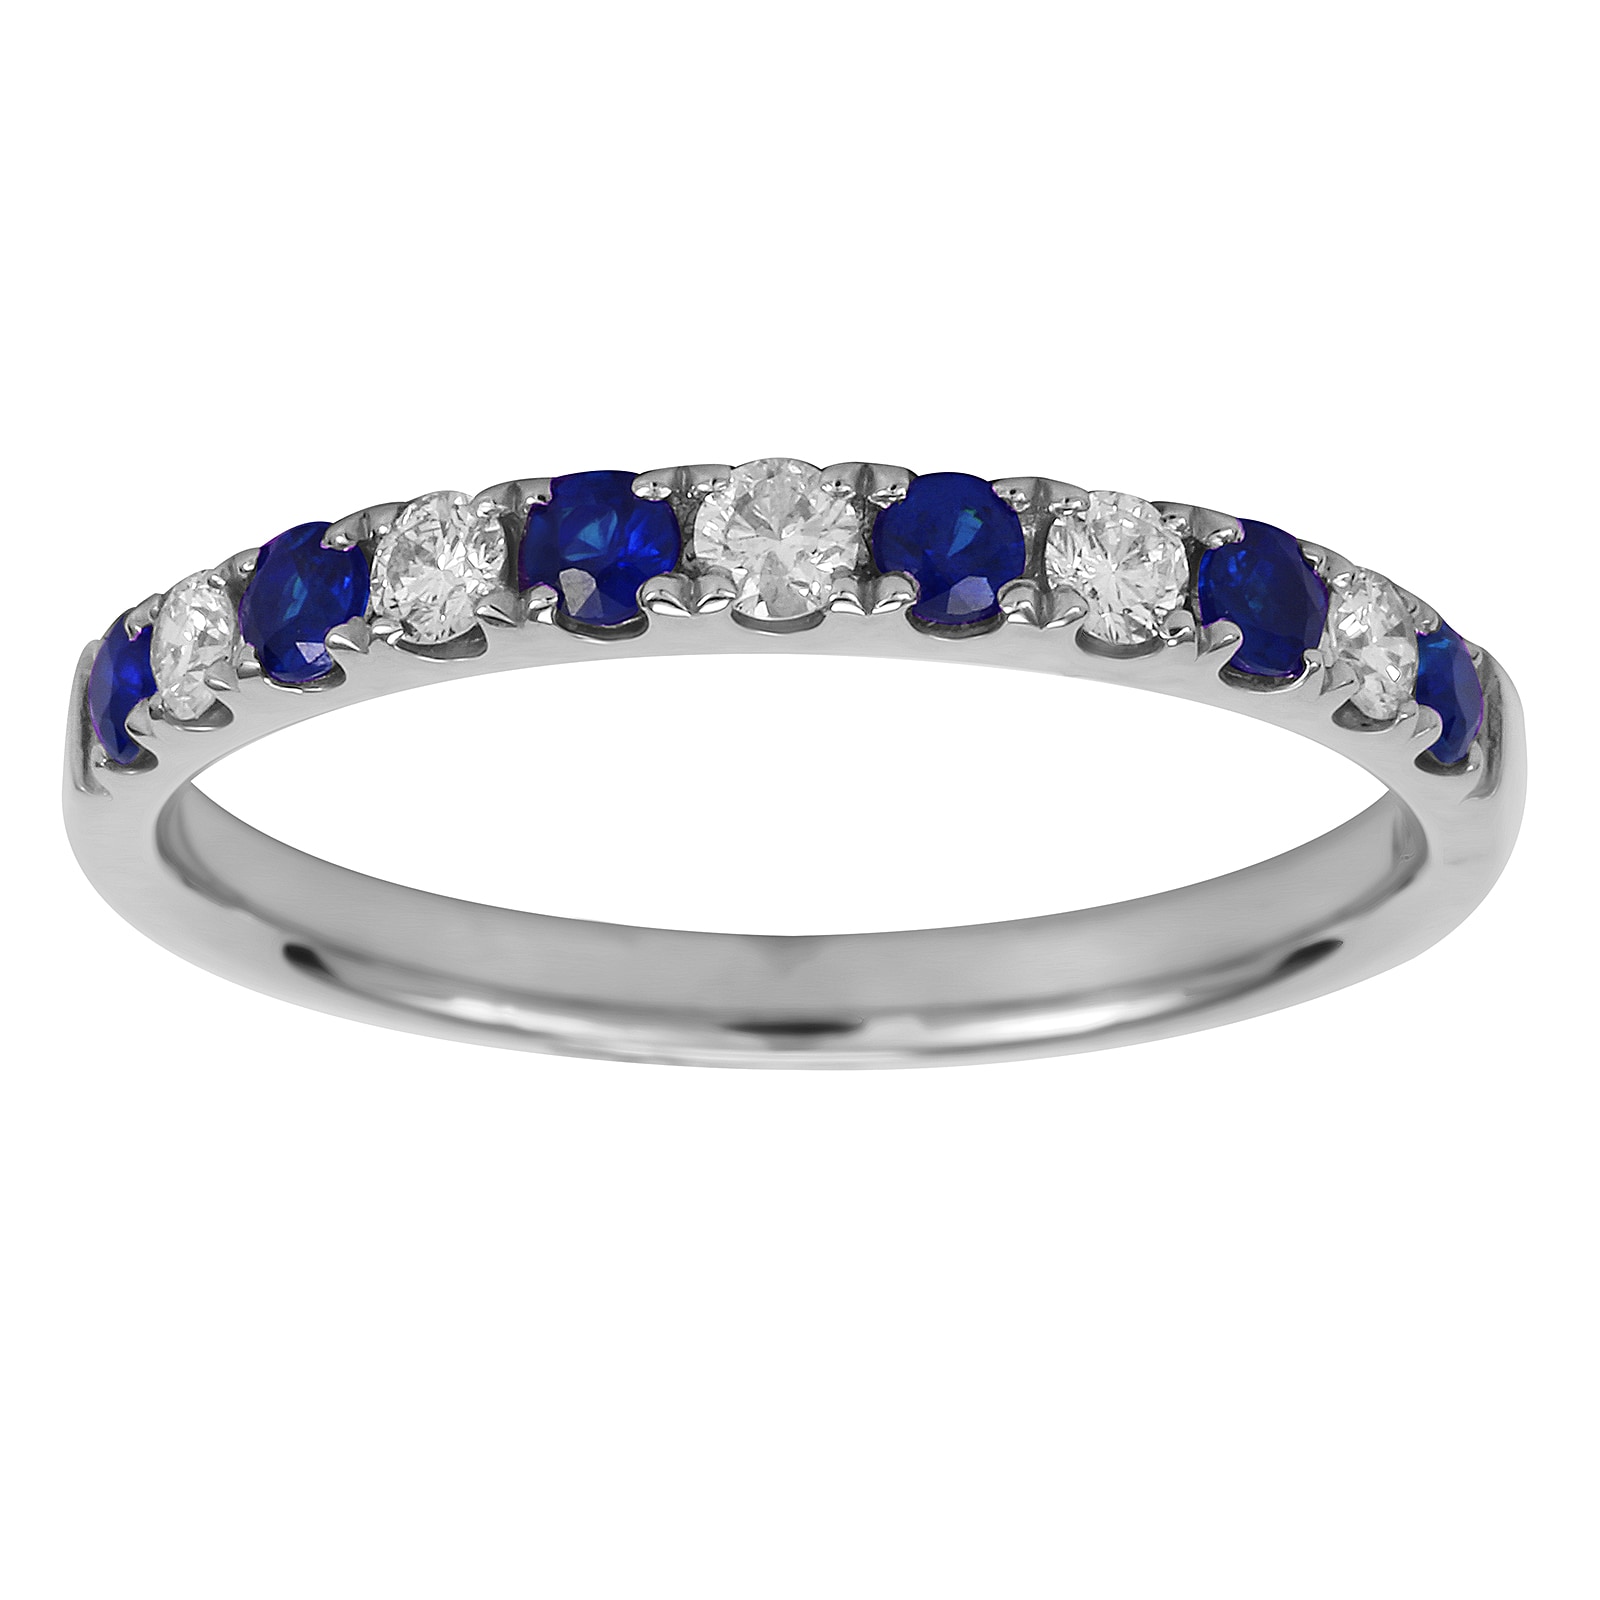 18ct White Gold 0.20ct Diamond & Sapphire Eternity Rings - Ring Size I